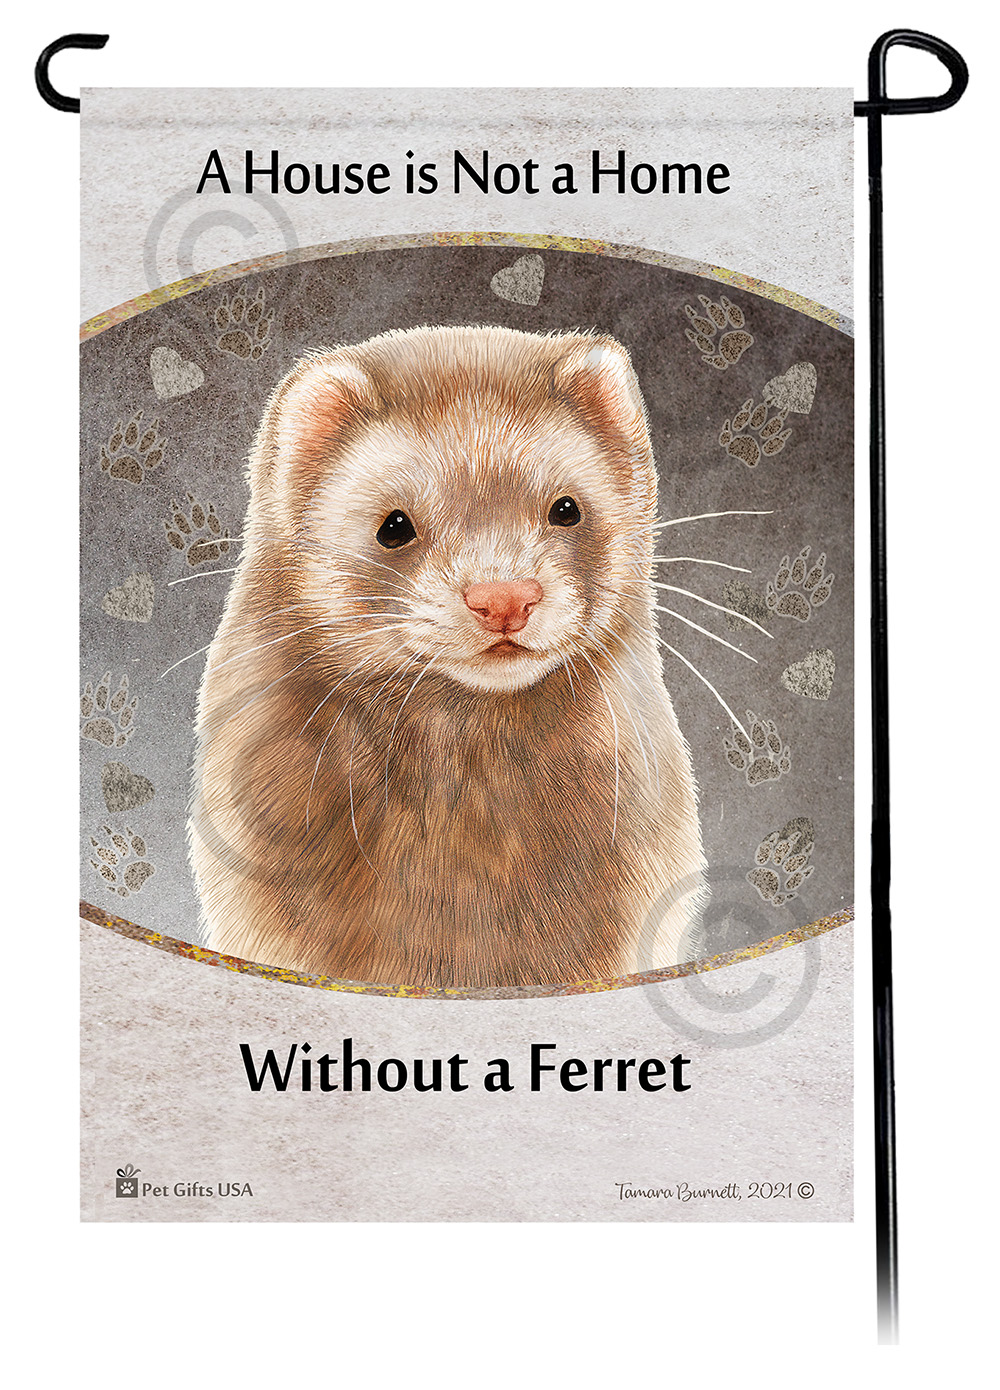 Ferret Cinnamon A House Is Not A Home - Garden Flag image